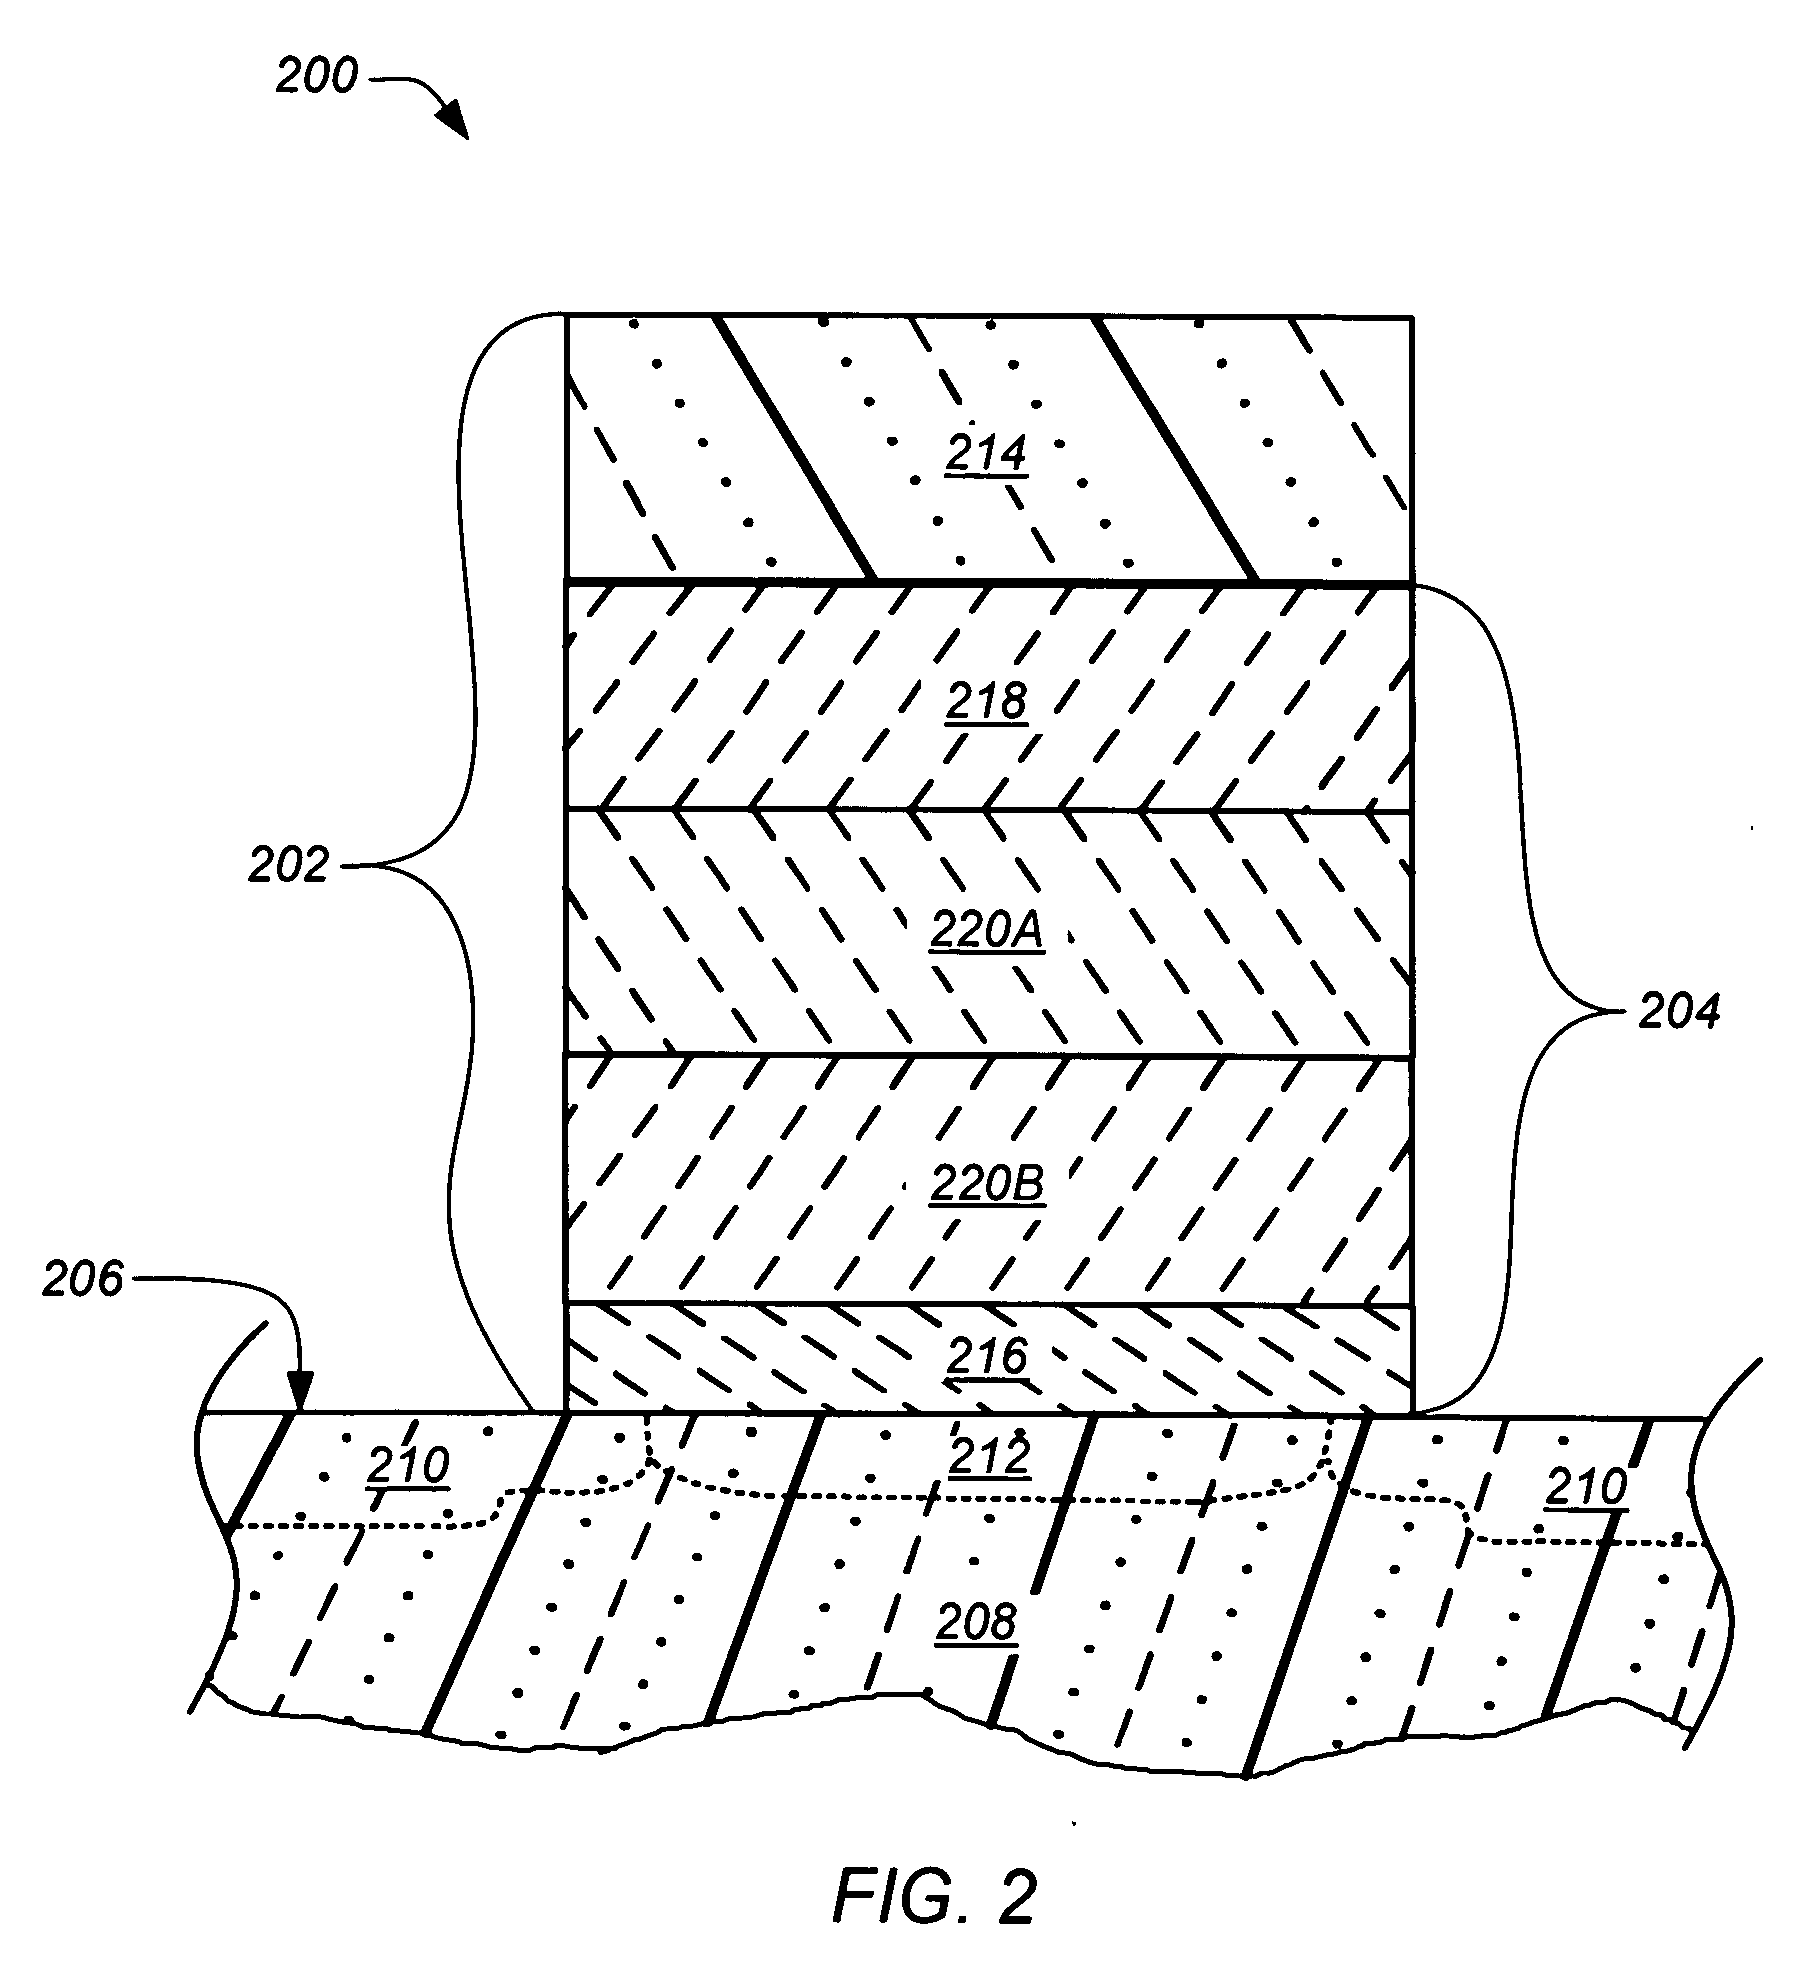 Oxide-nitride-oxide stack having multiple oxynitride layers